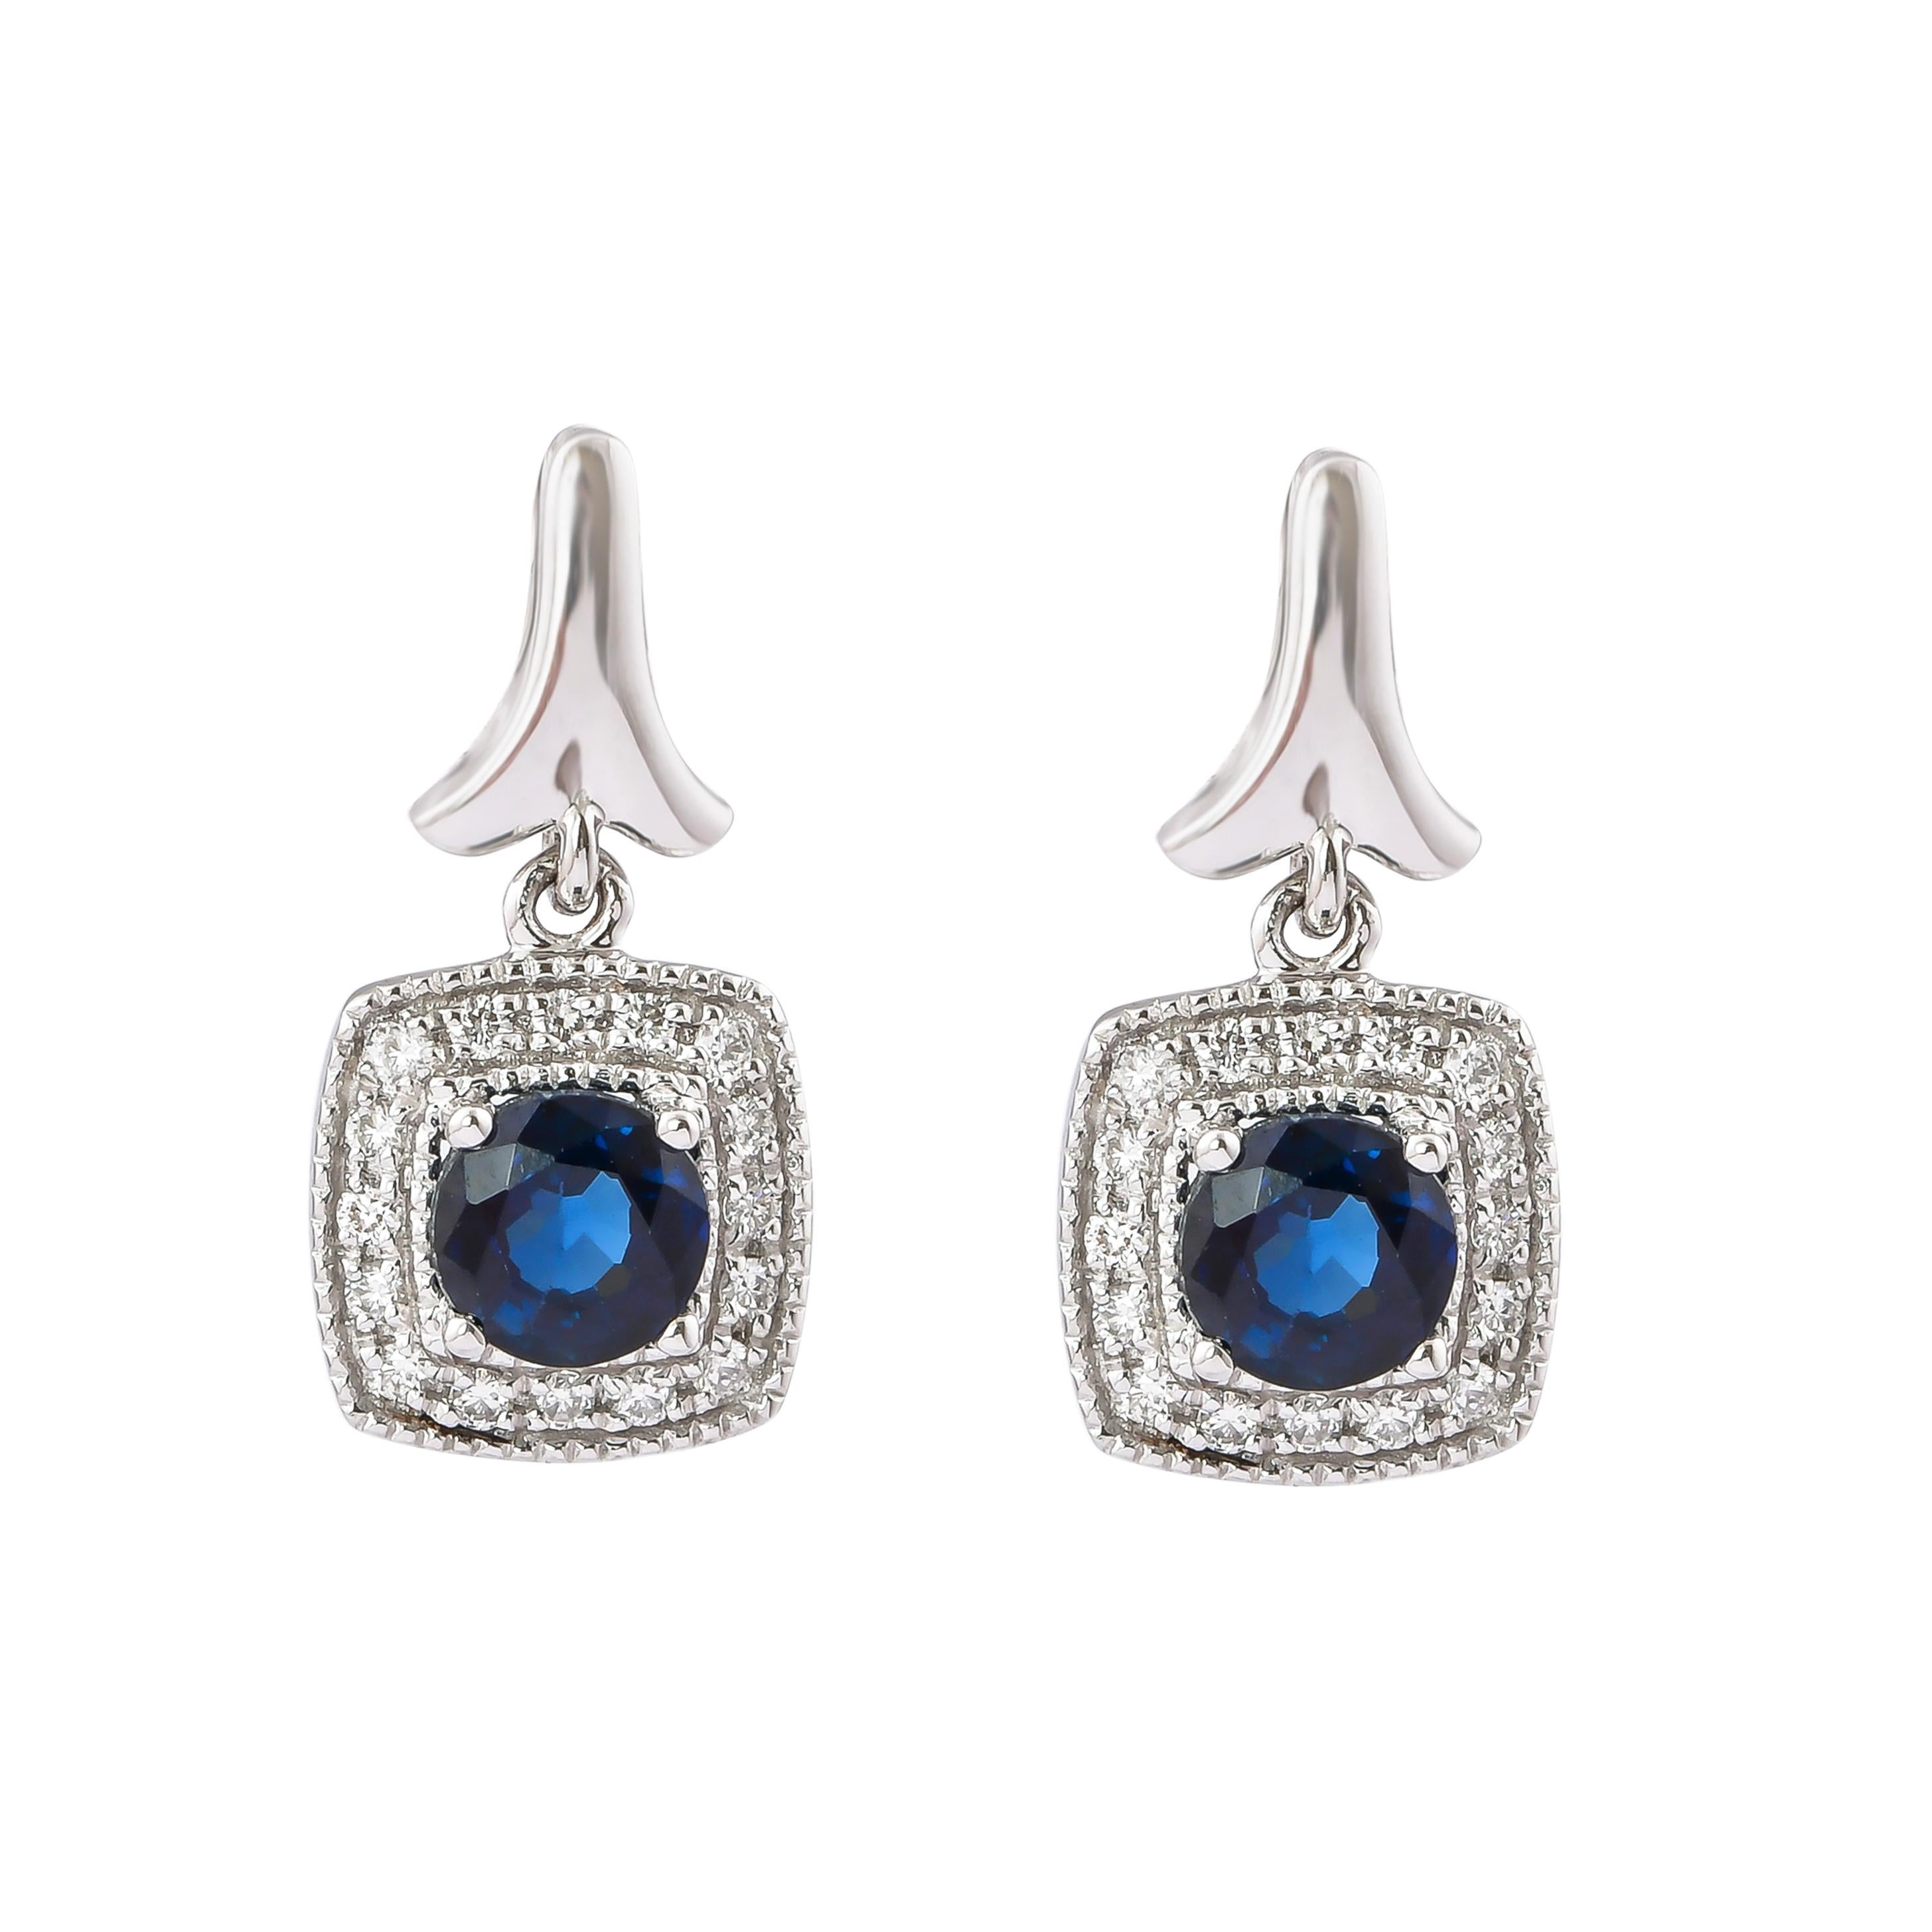 Contemporary 0.8 Carat Blue Sapphire and Diamond Earring in 18 Karat White Gold